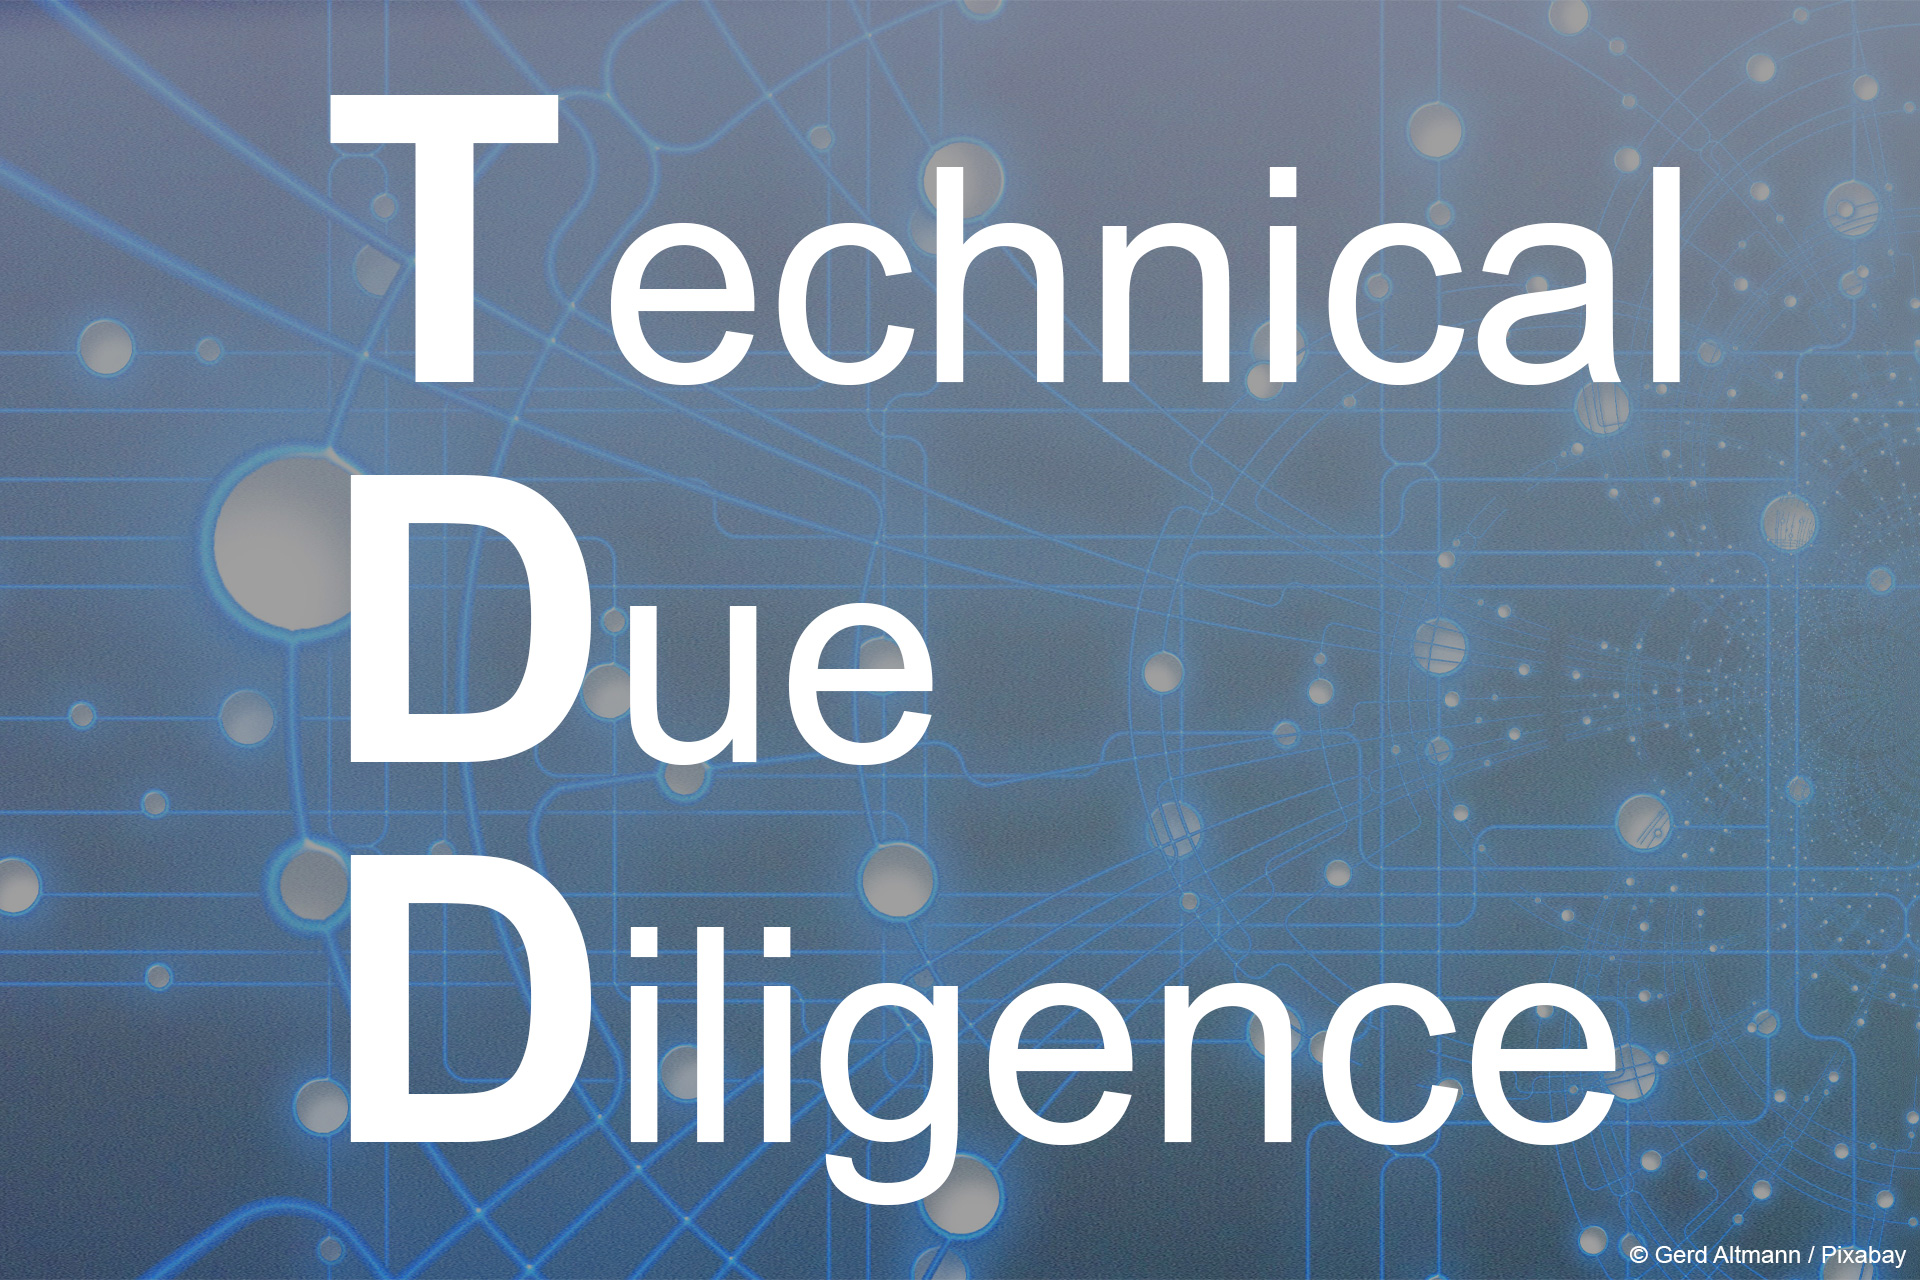 Technical Due Diligence